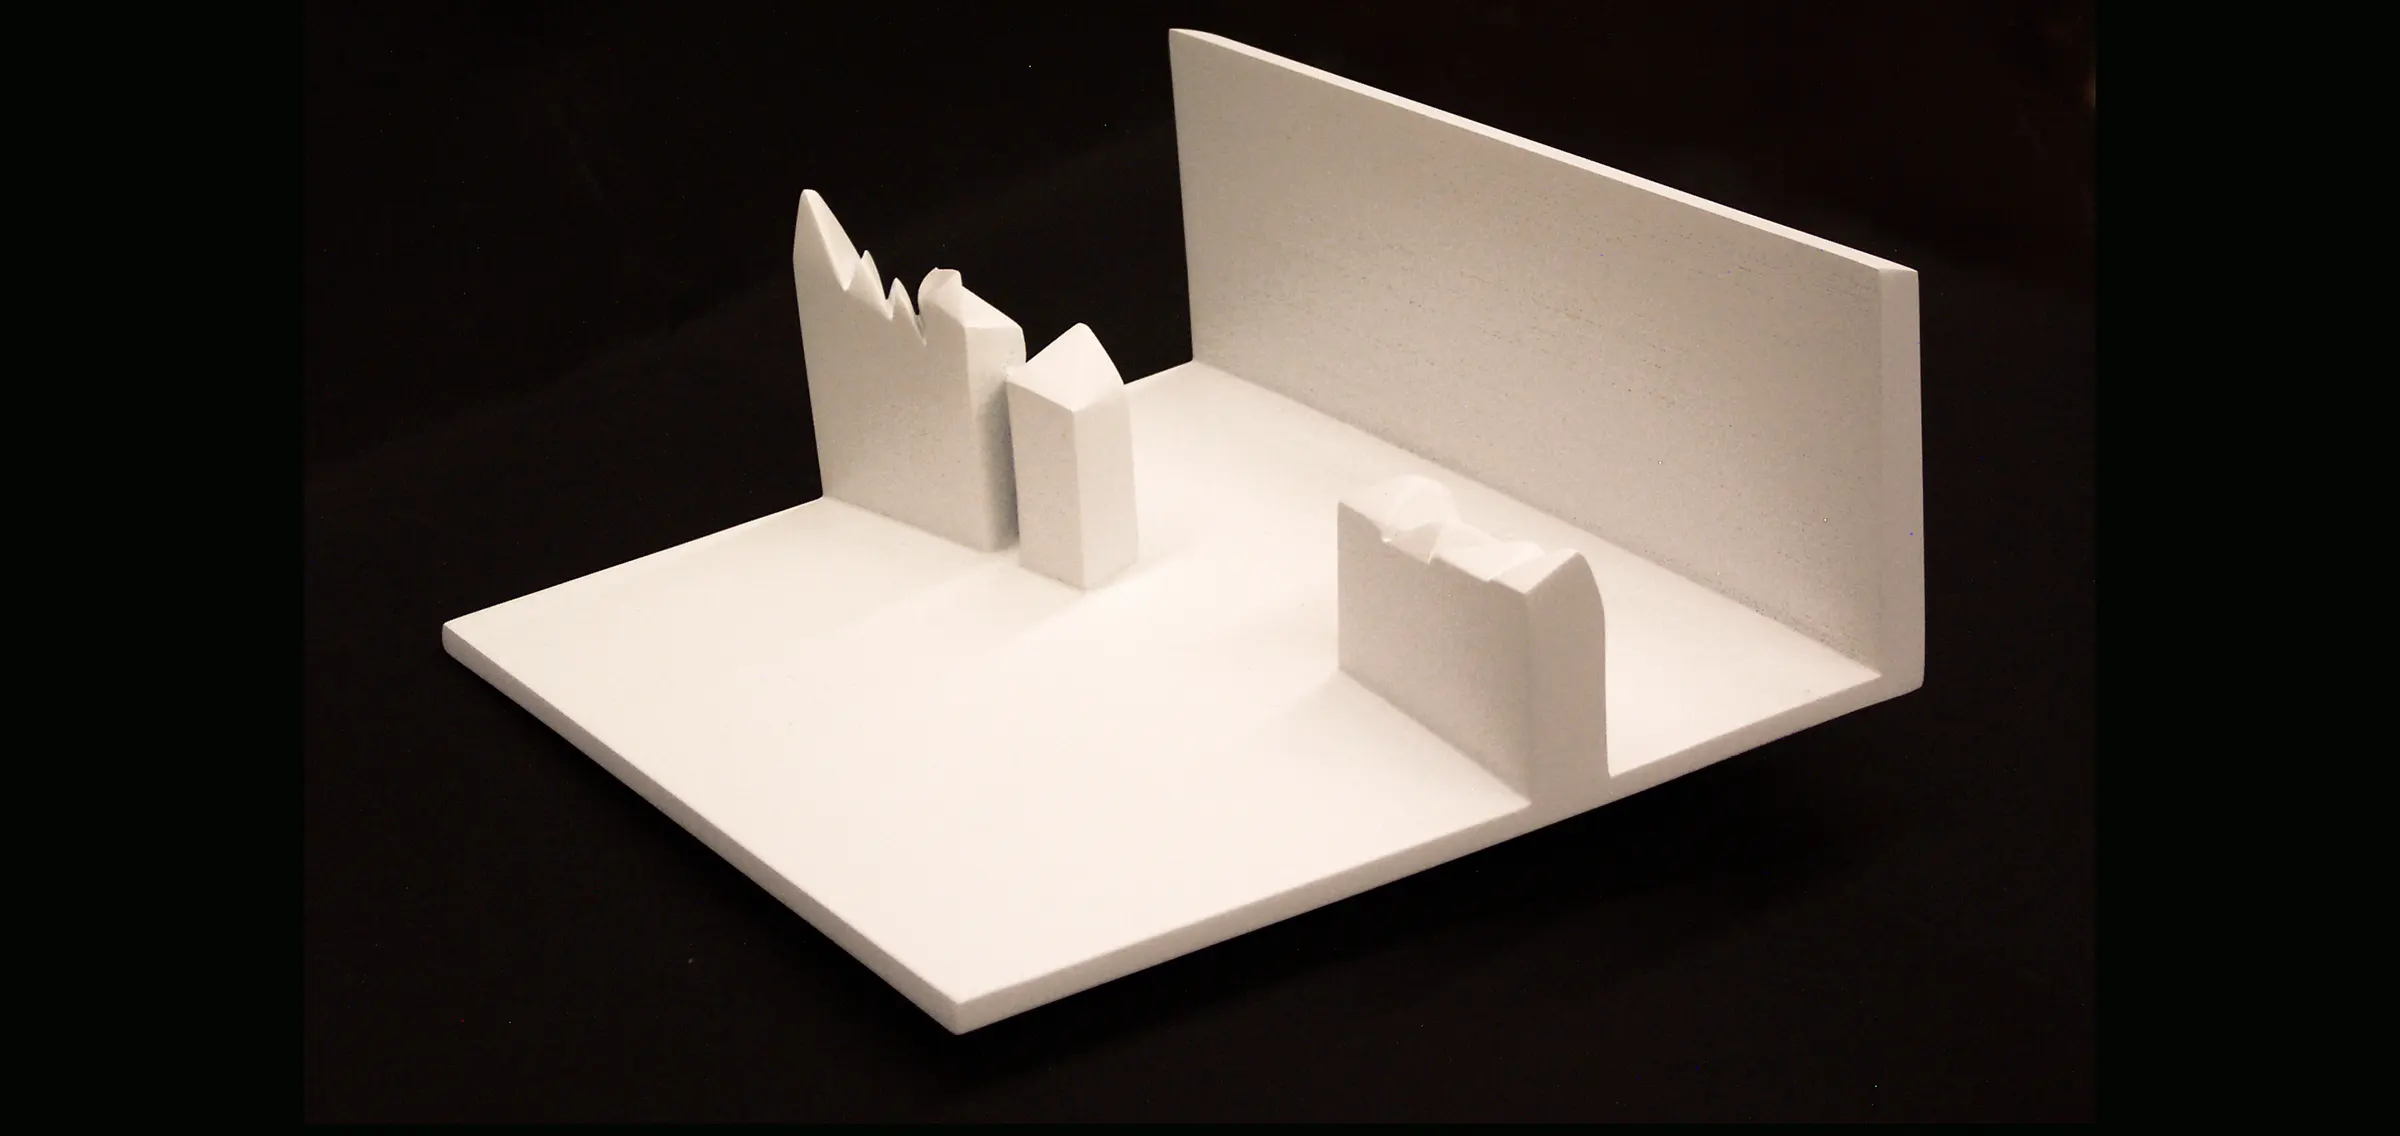 The same folded-paper like buidling but complete white without any colors: abstract